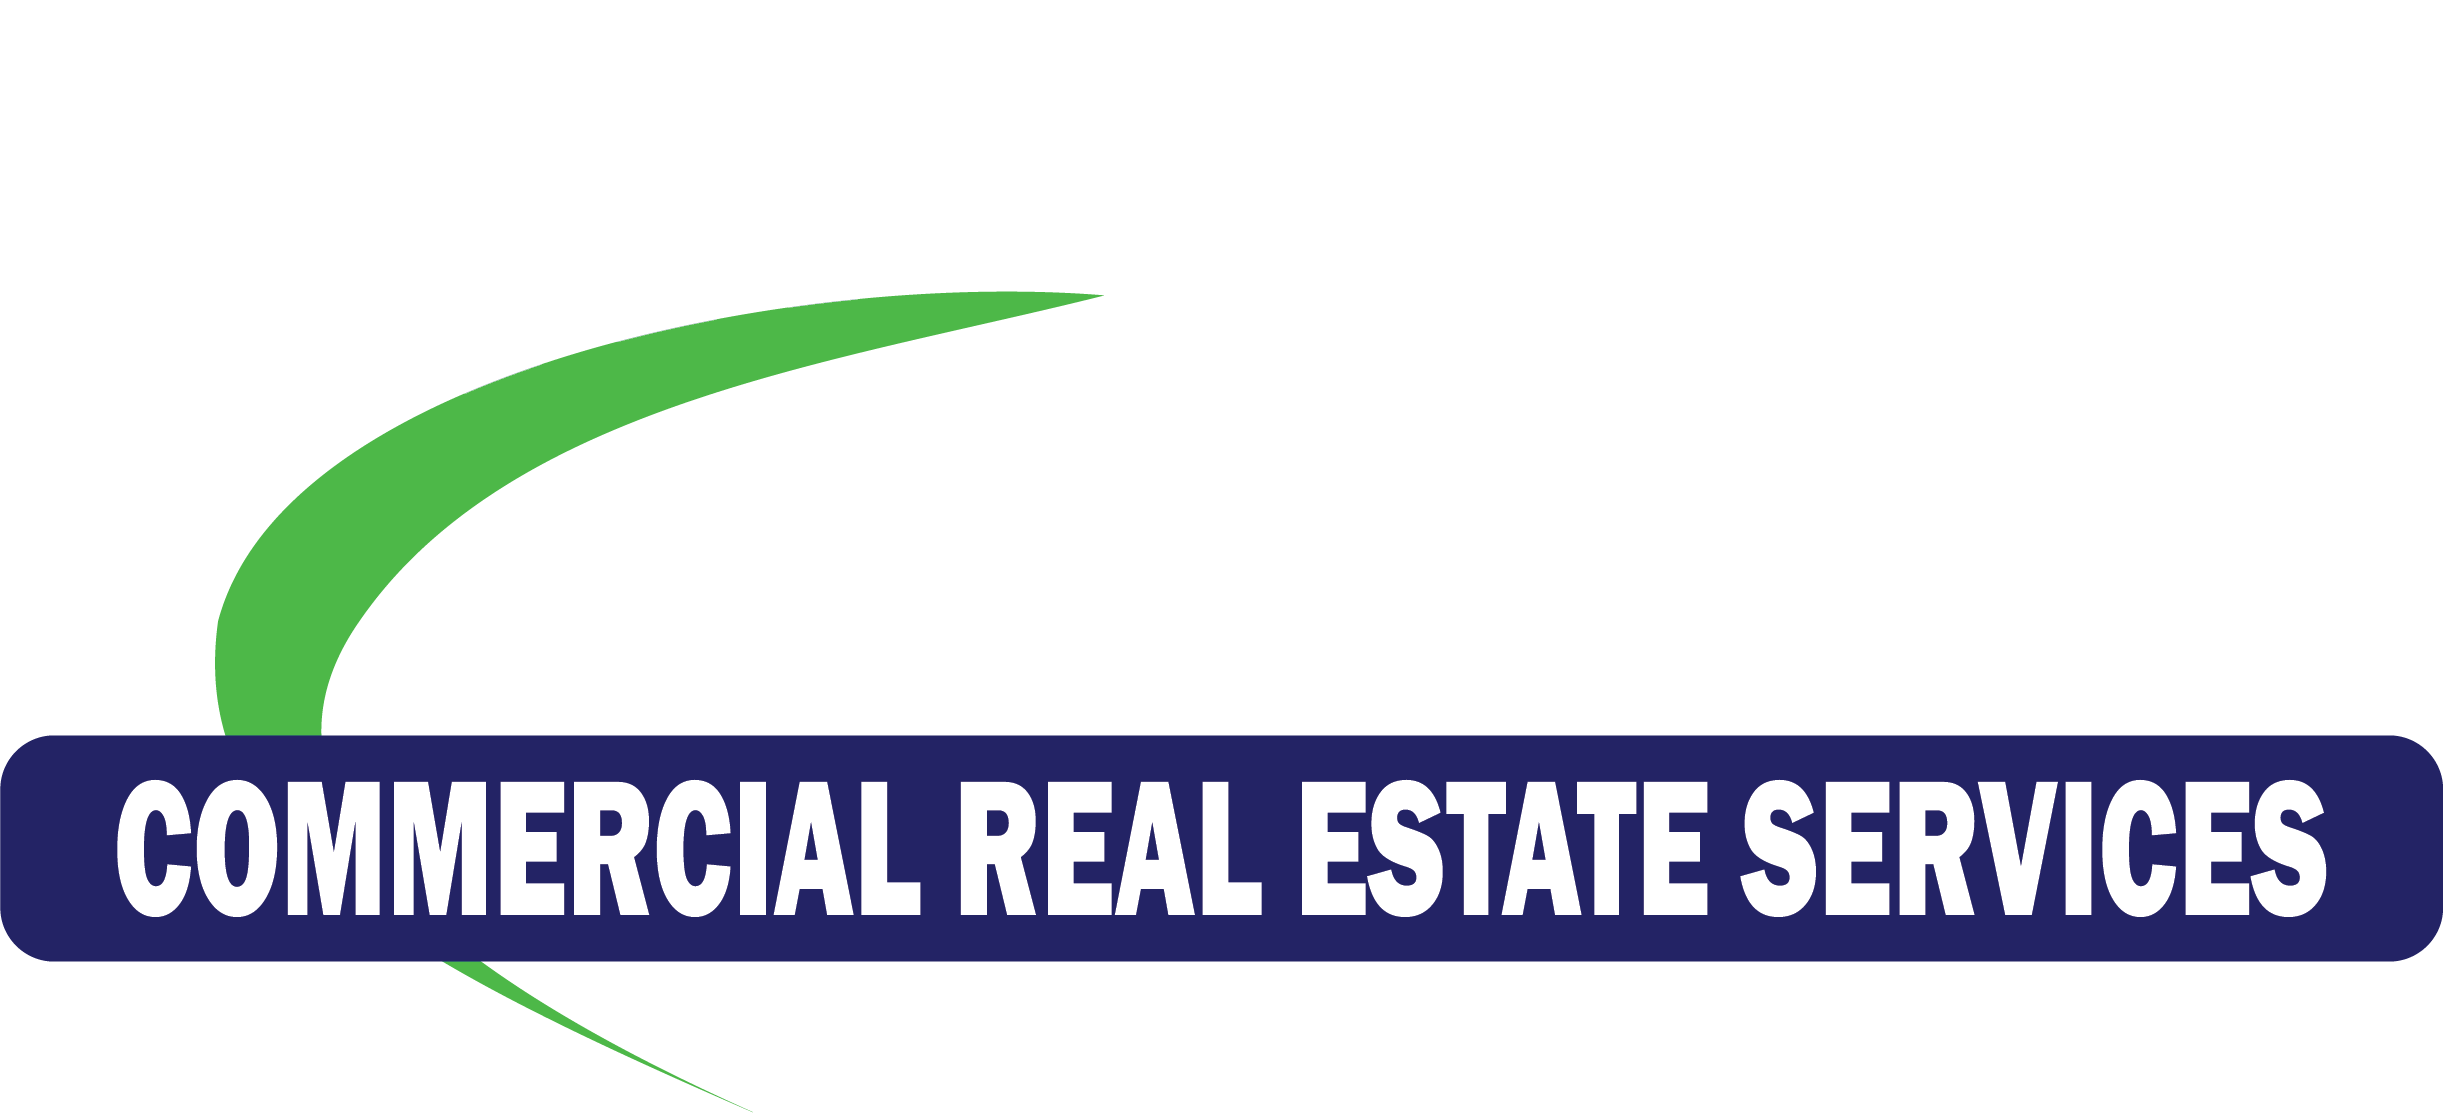 CRES - Commercial Real Estate Services